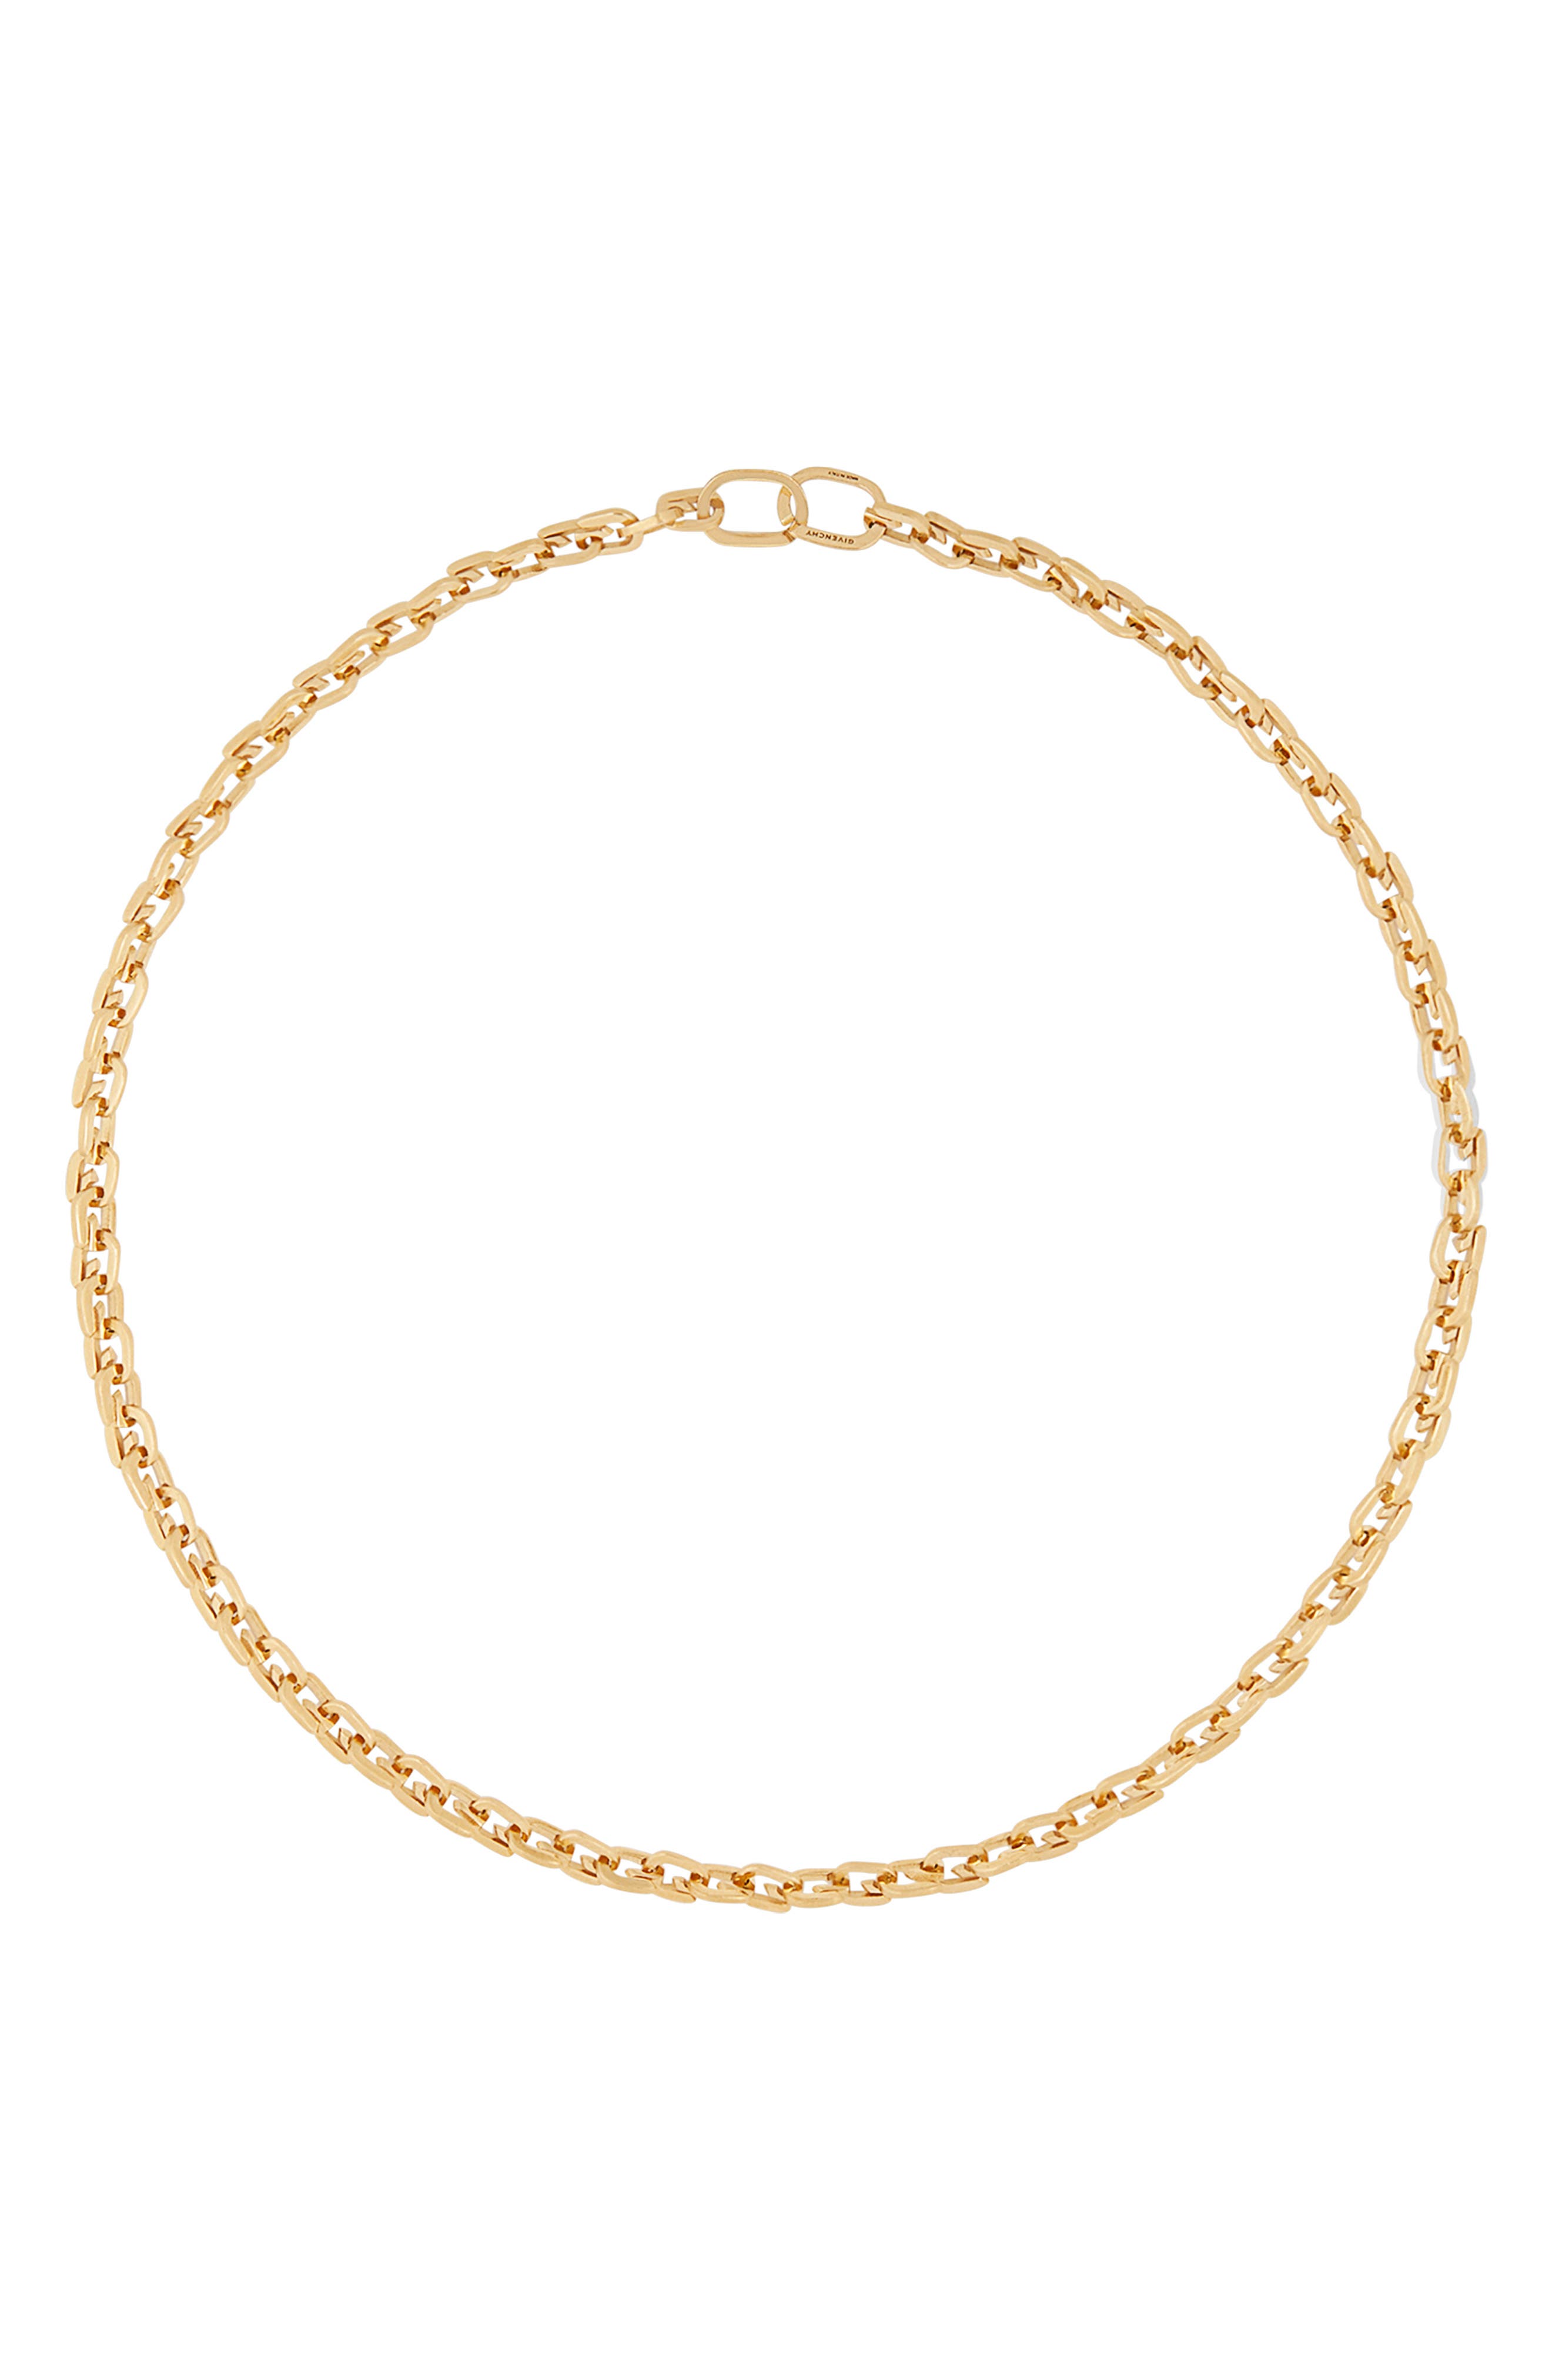 Women's Givenchy Jewelry | Nordstrom